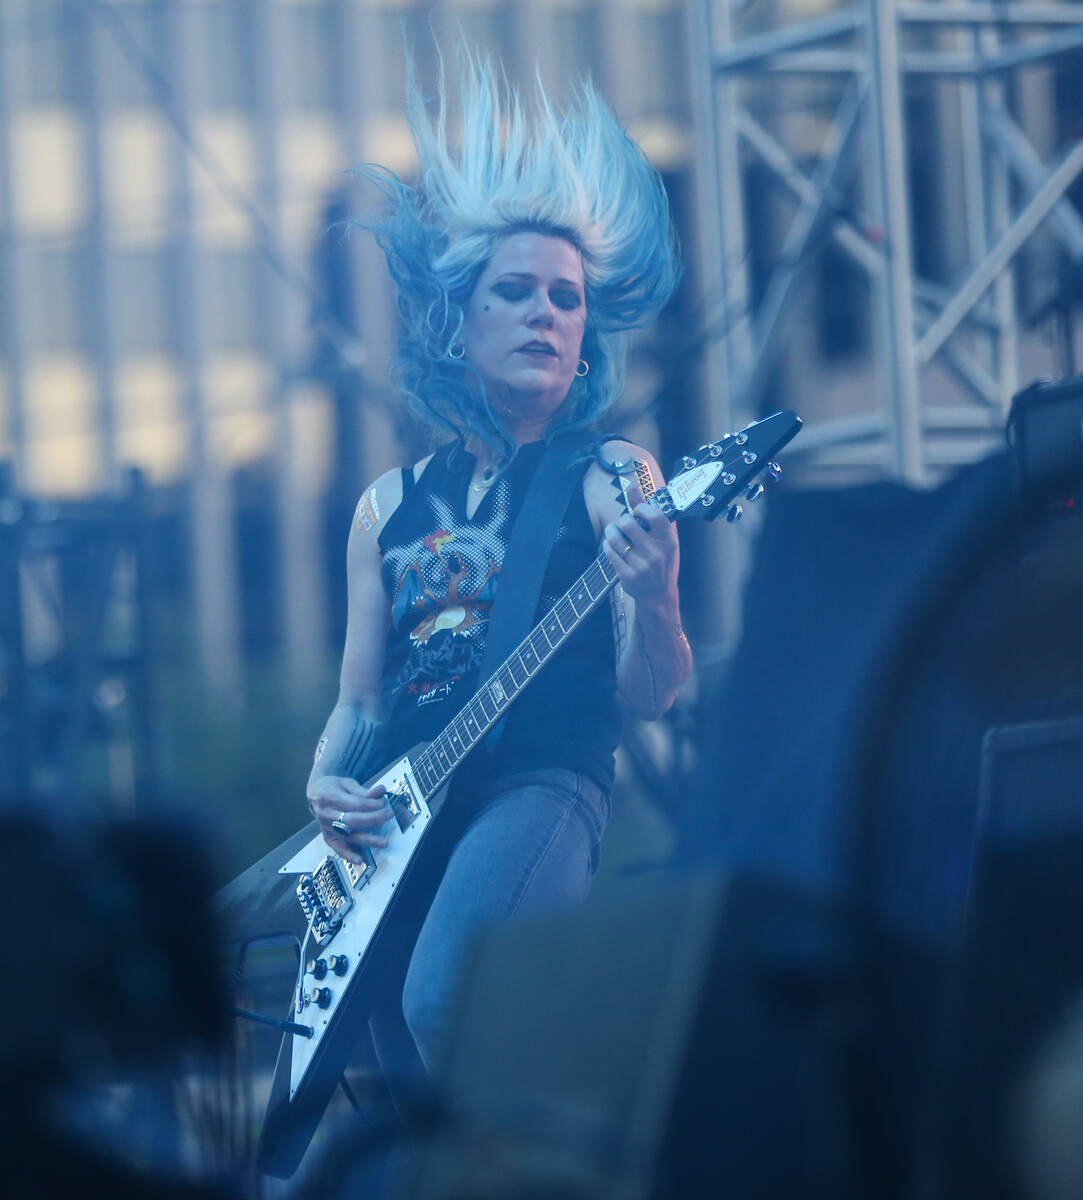 Donita Sparks of L7 performs during the first day of the Punk Rock Bowling music festival in do ...